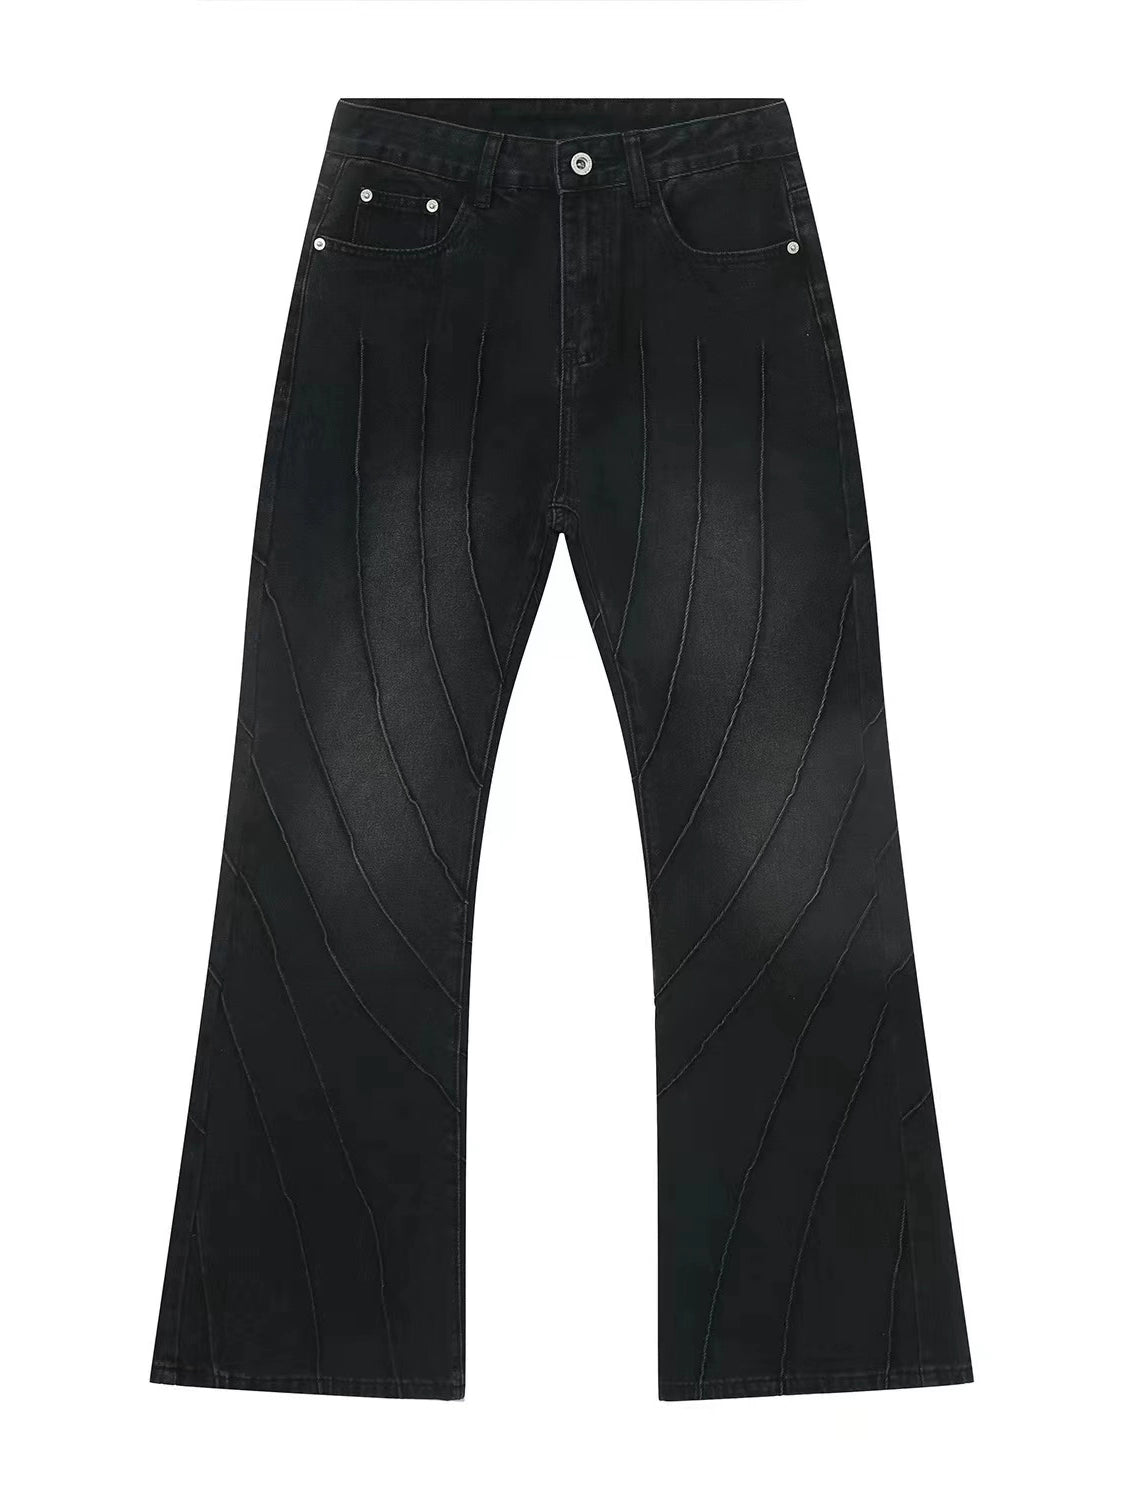 Deconstructed Flare Denim Jeans WN3330